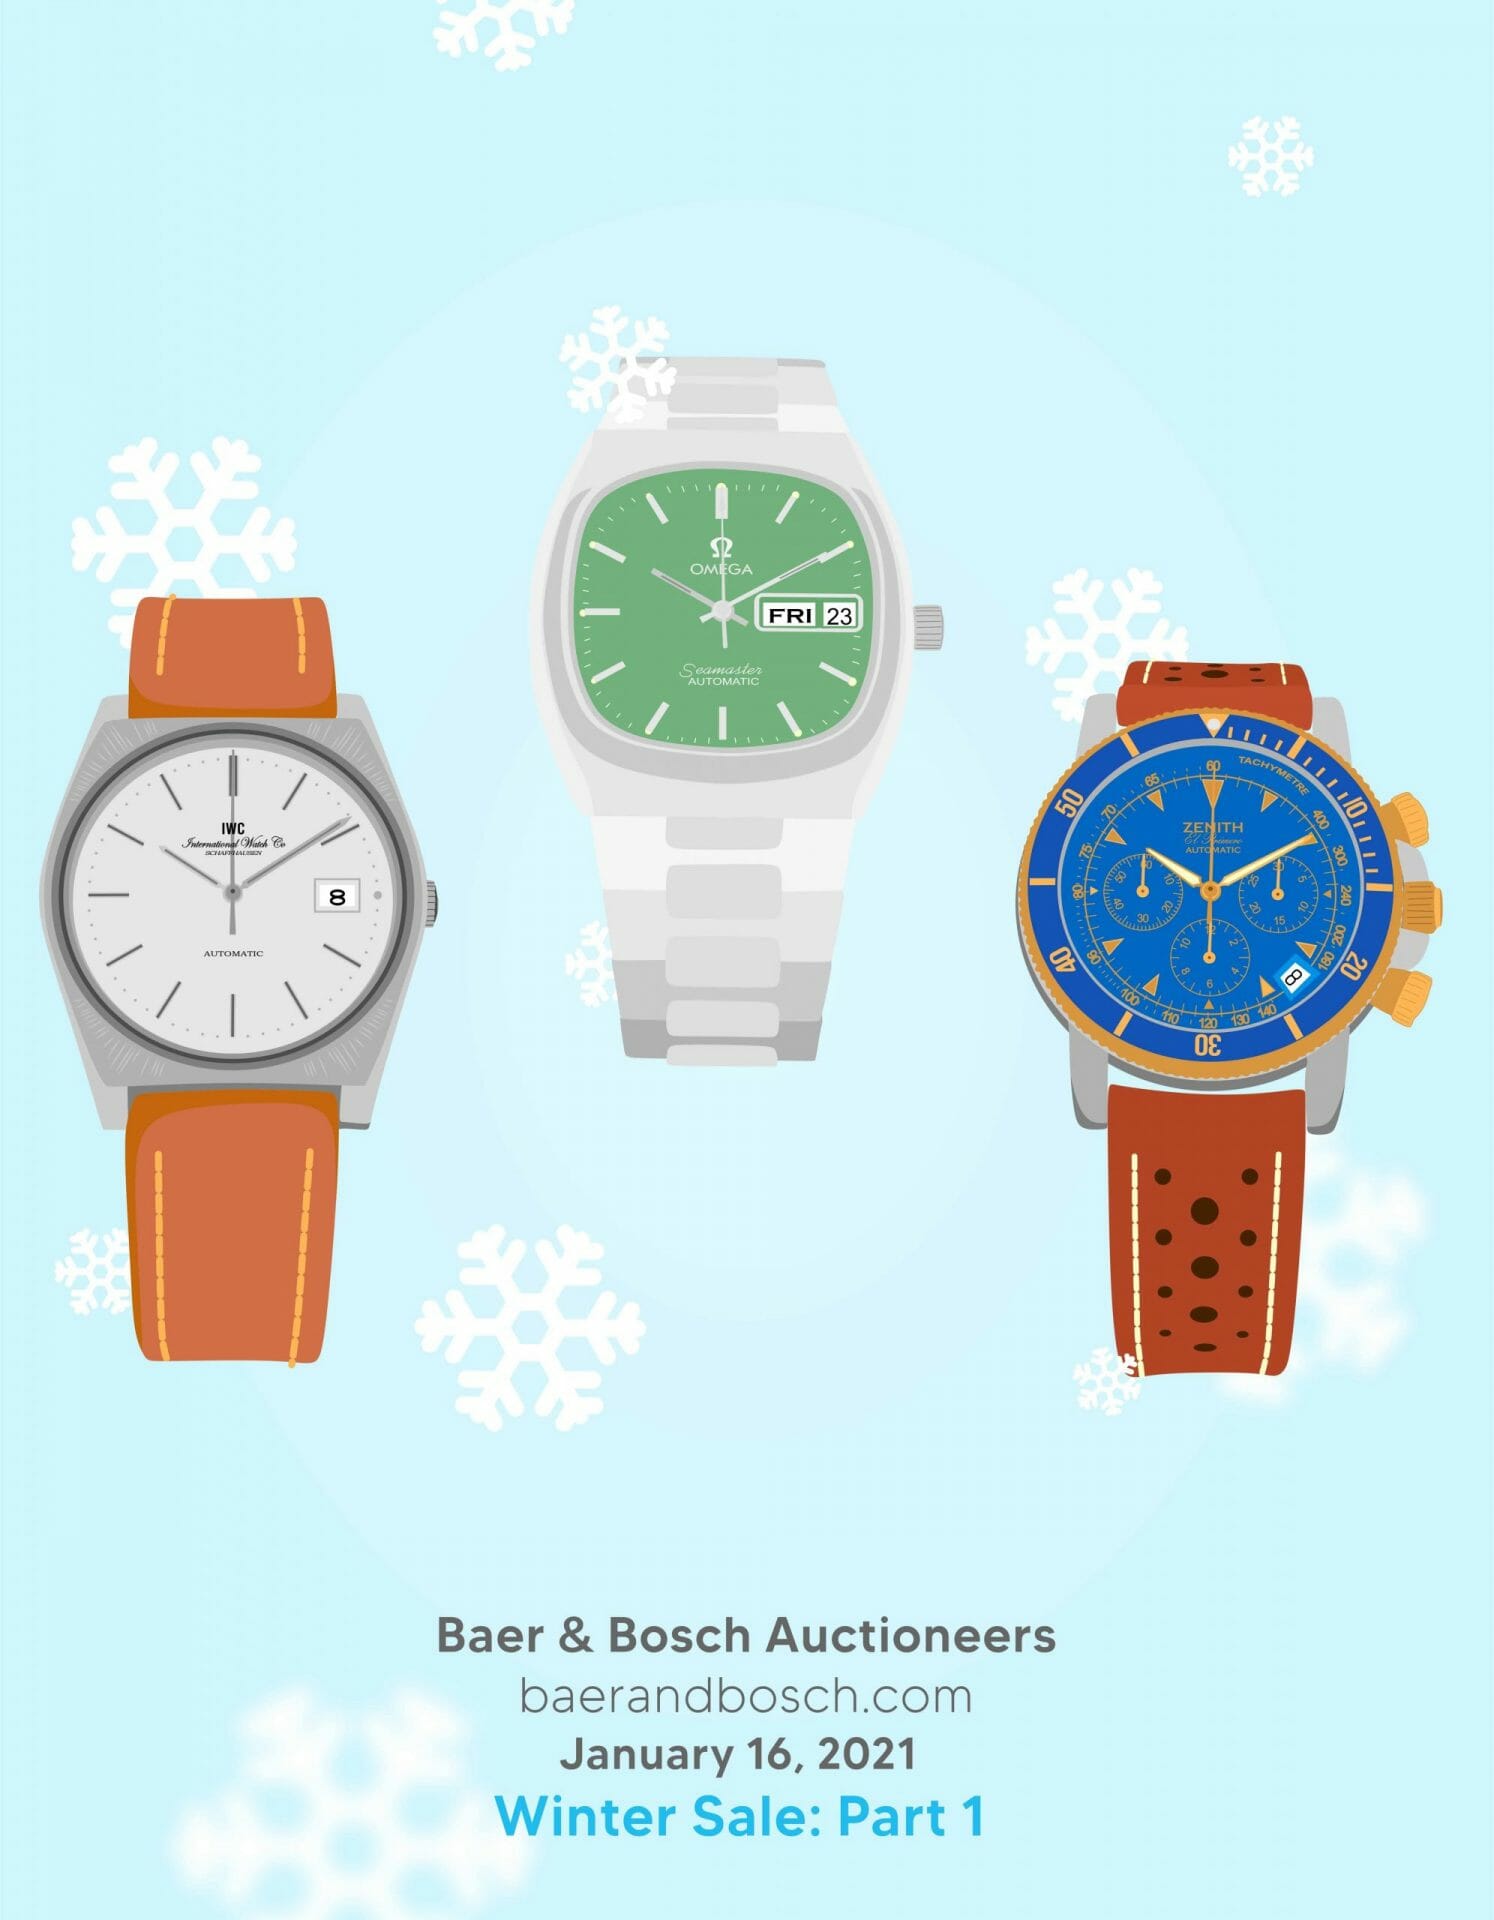 Baer and Bosch Auctioneers watch